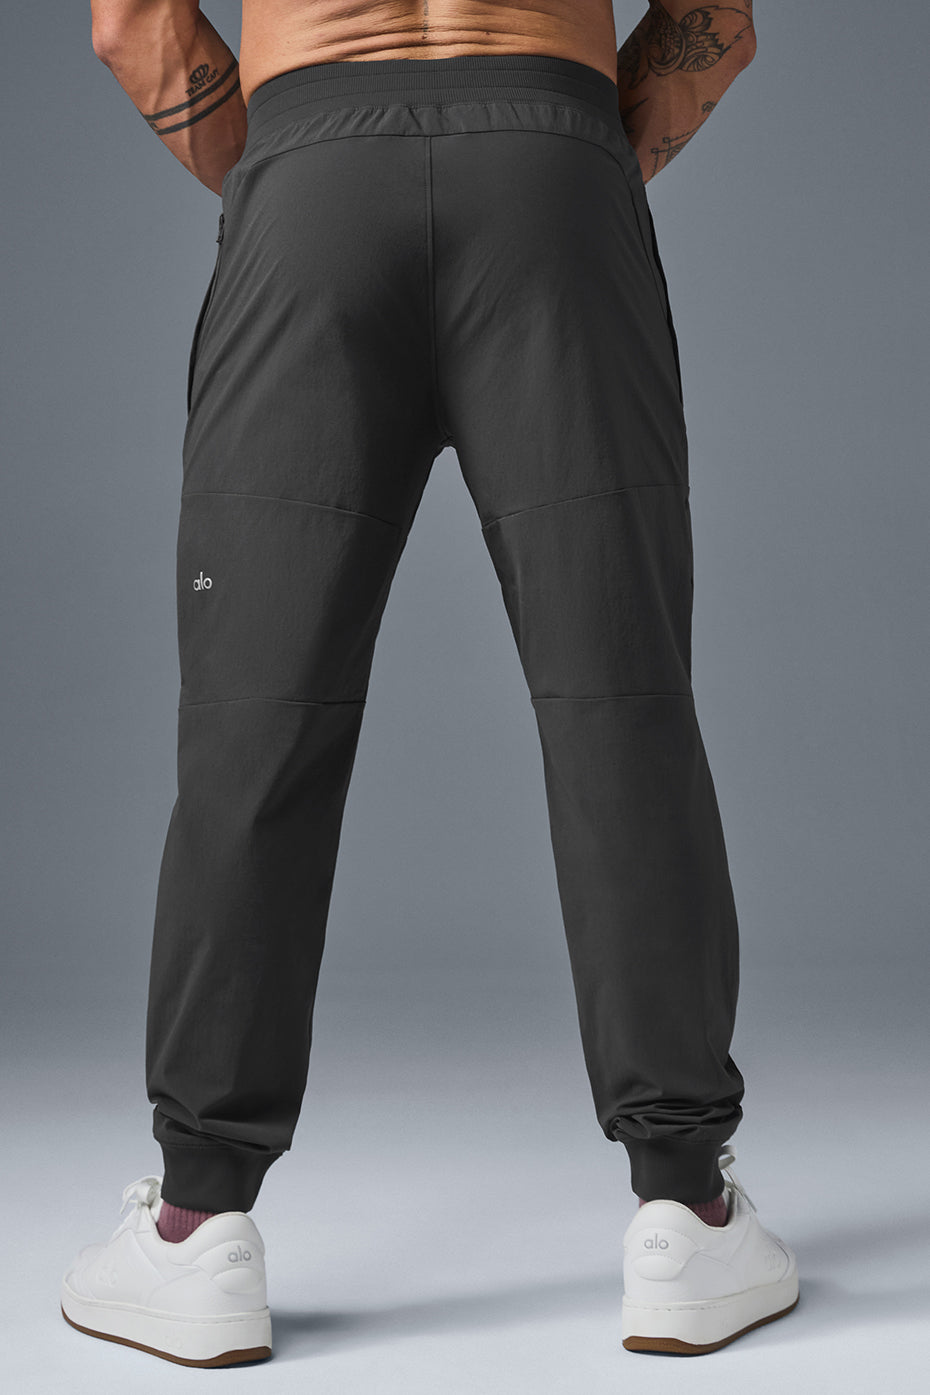 Co-Op Pant - Anthracite